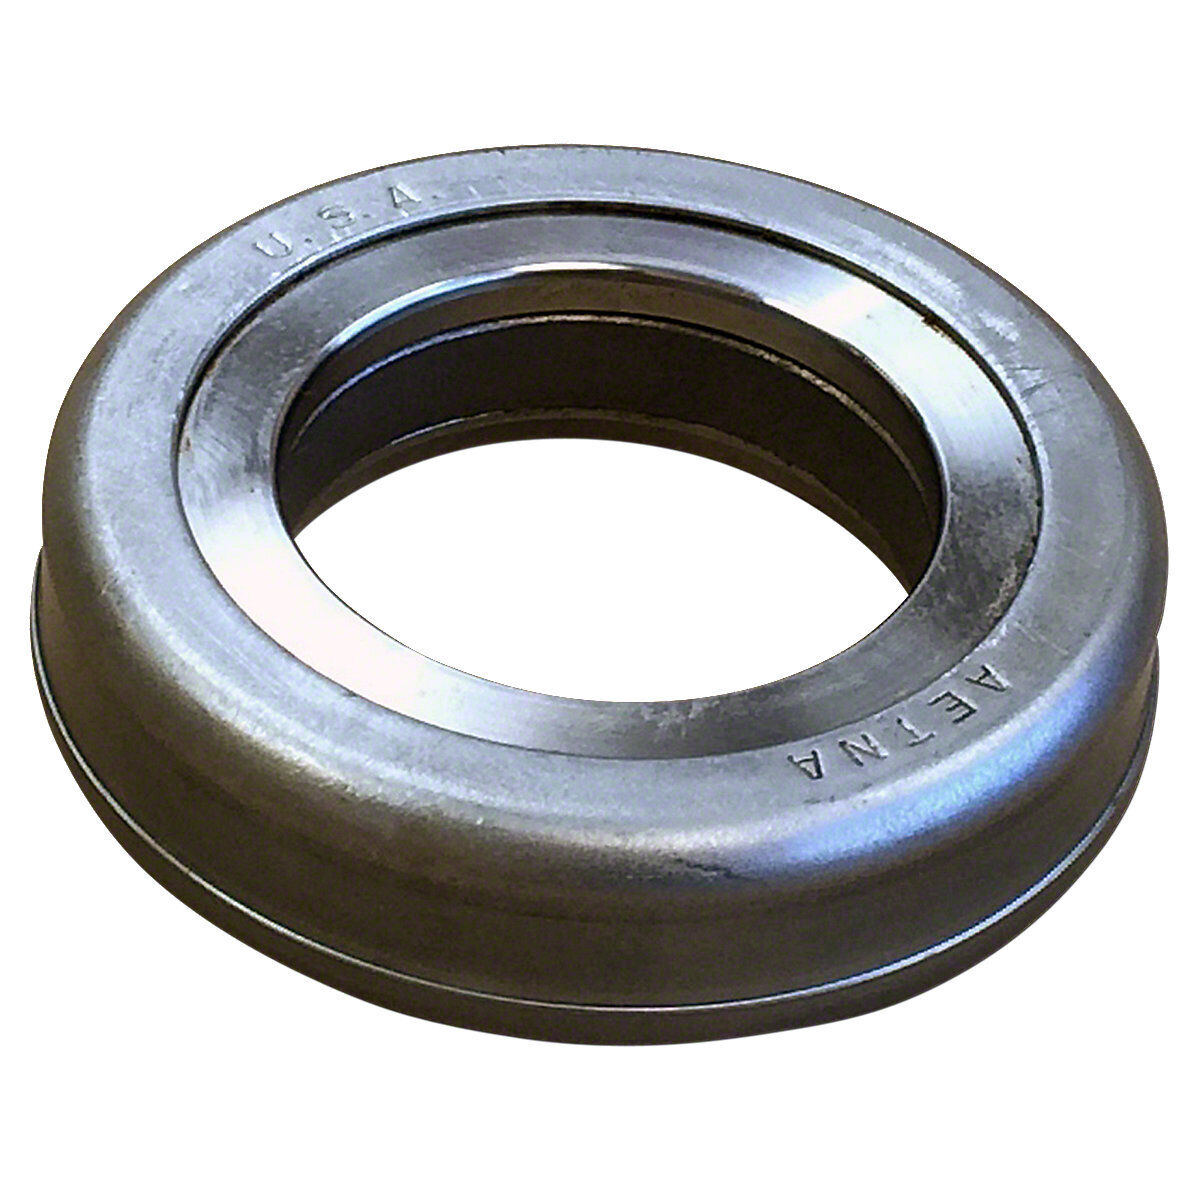 KS5022 Clutch Throw-Out Bearing-Fits White Oliver Tractor HG OC3 OC6 60 66